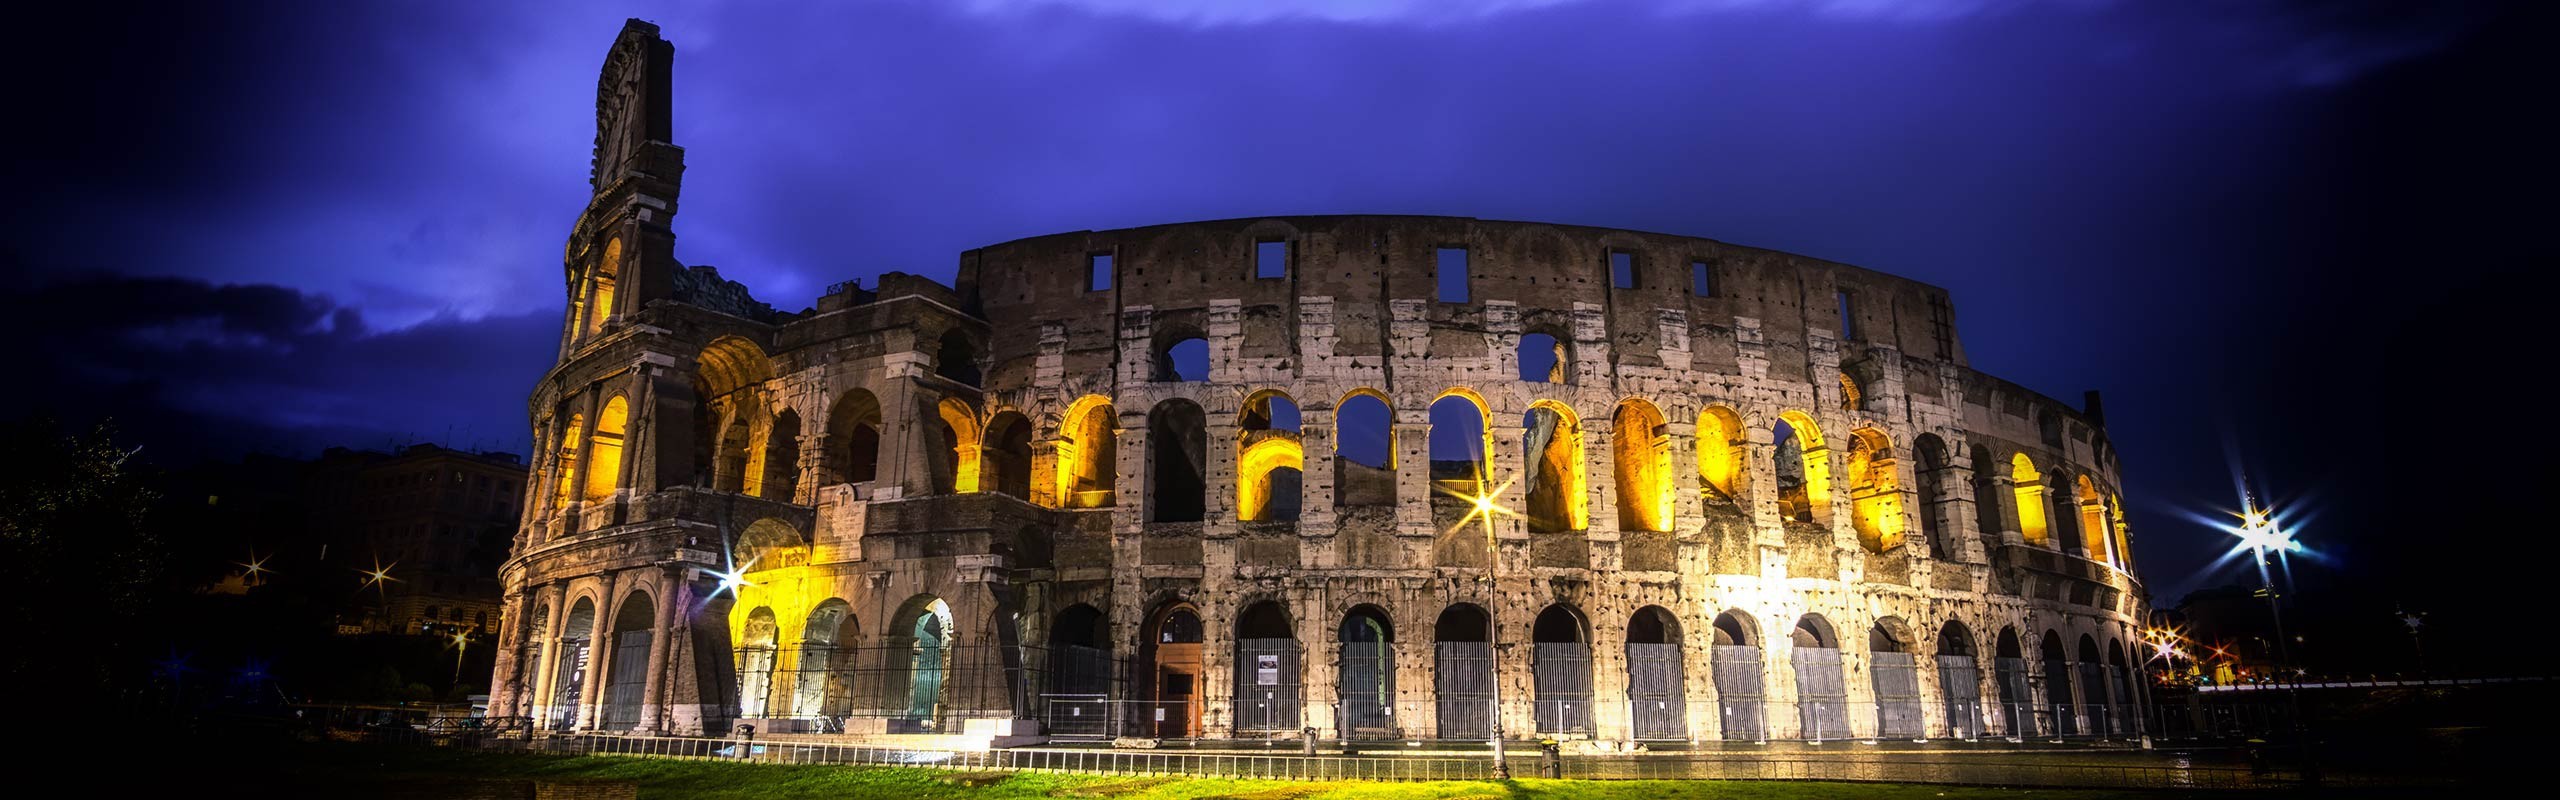 Night at the Colosseum Tickets - SelectItaly.com